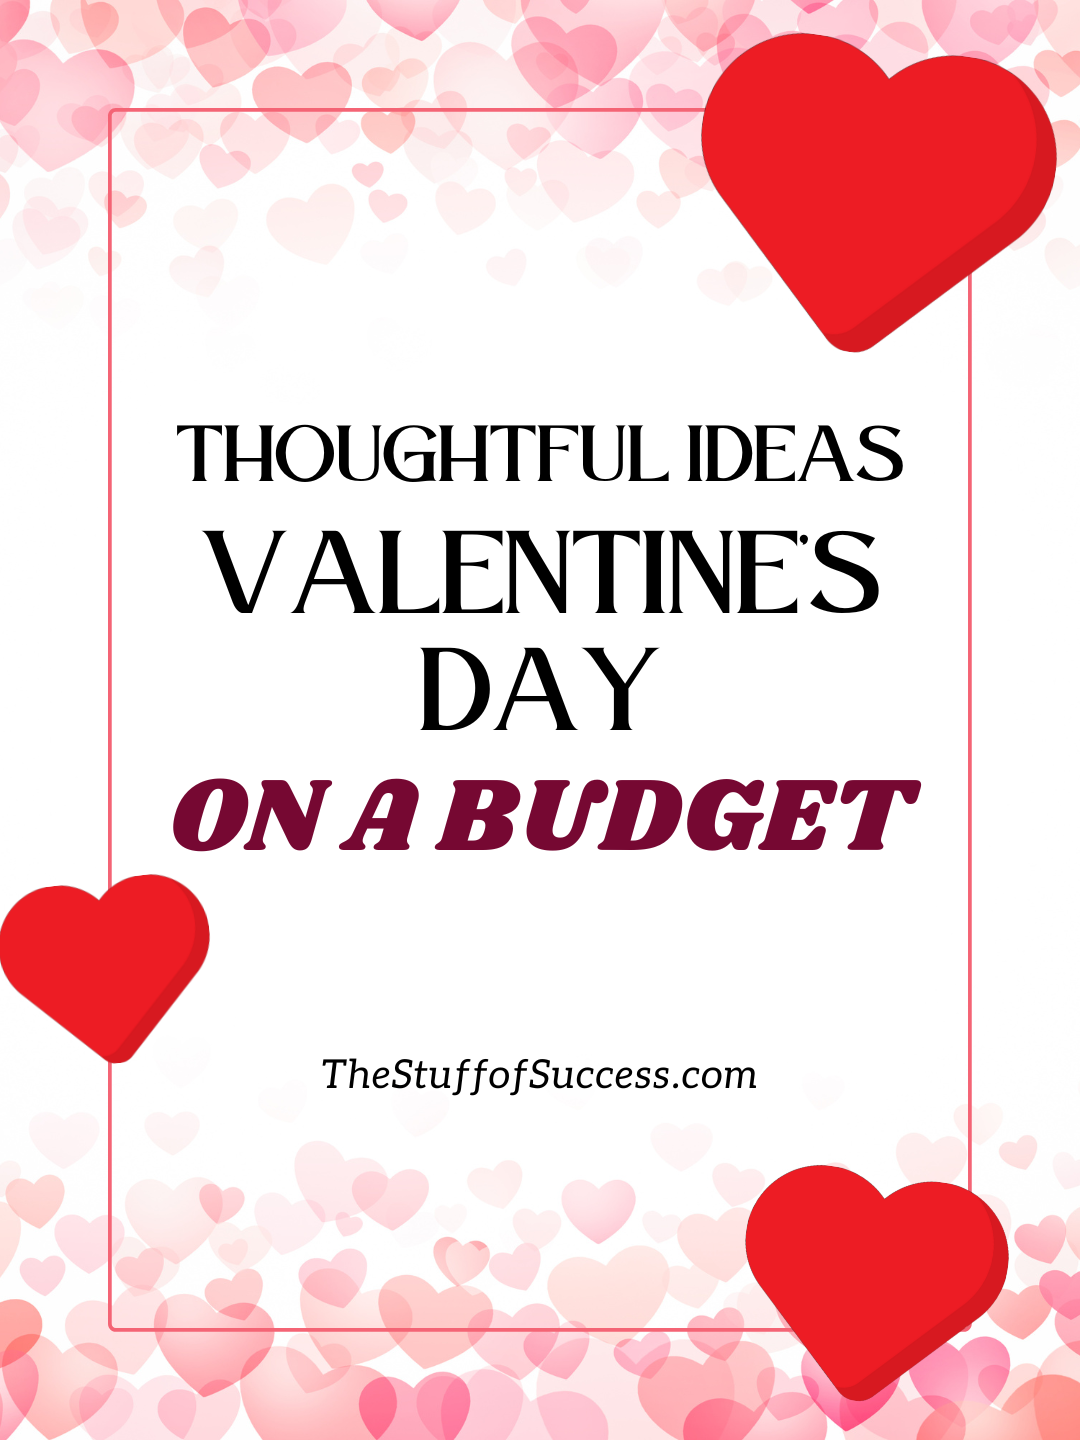 Thoughtful Ideas for Celebrating Valentine's Day on a Budget